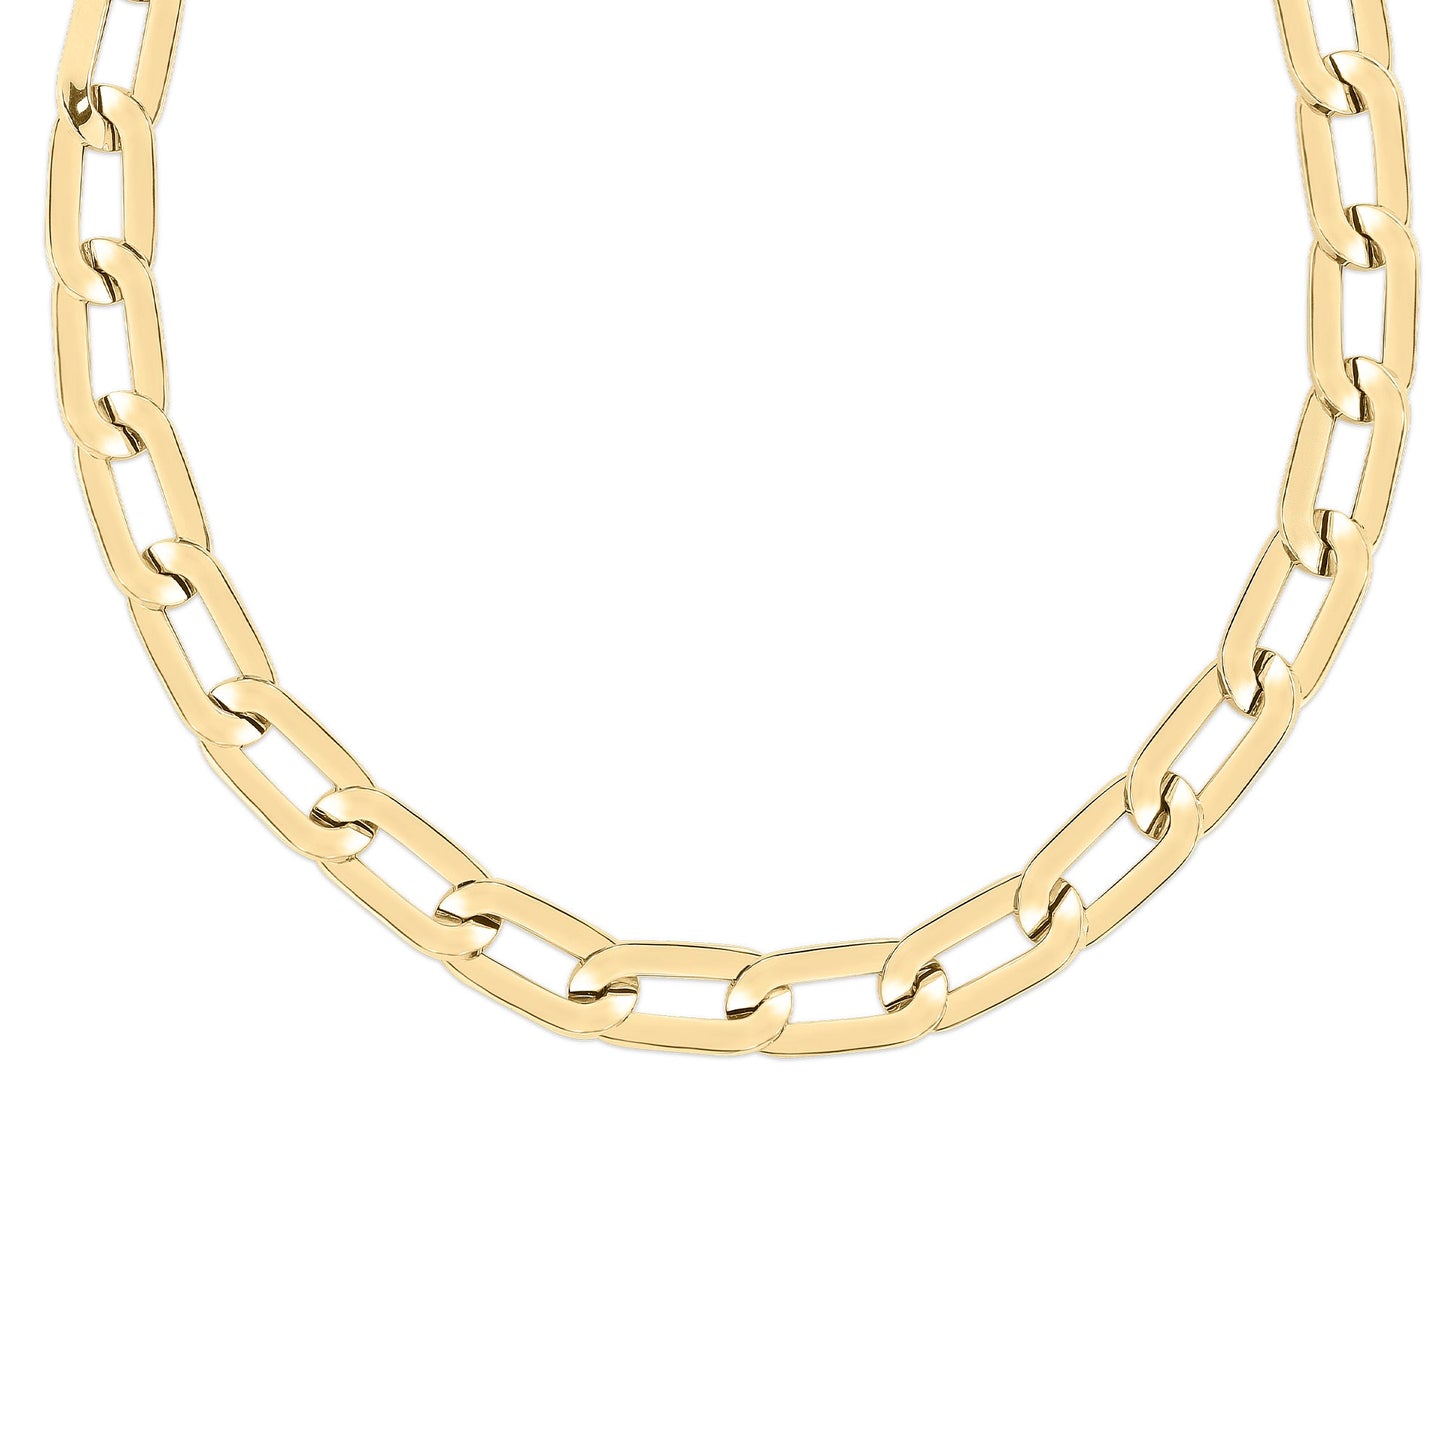 Roberto Coin Designer 18K Yellow Gold Squared Edge Paper Clip Link Chain Necklace